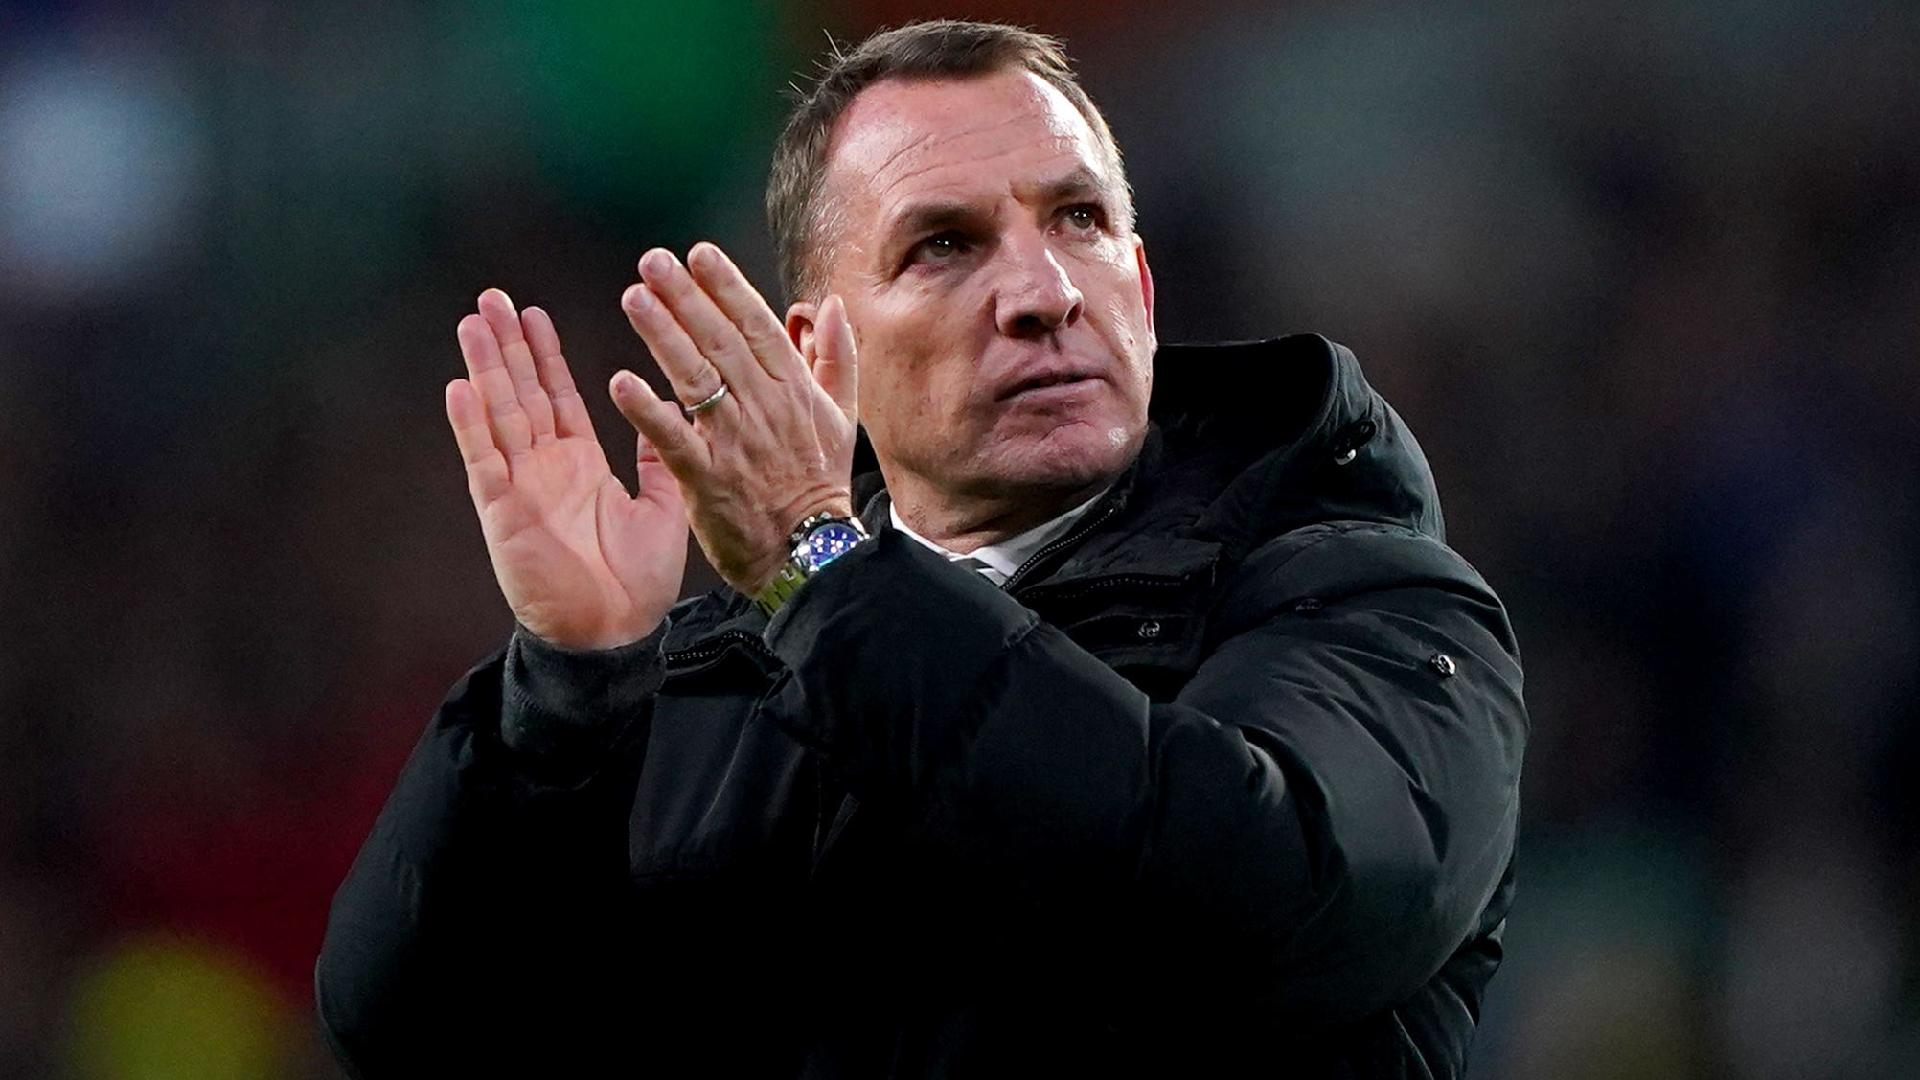 Brendan Rodgers elated after Celtic end long wait for Champions League win